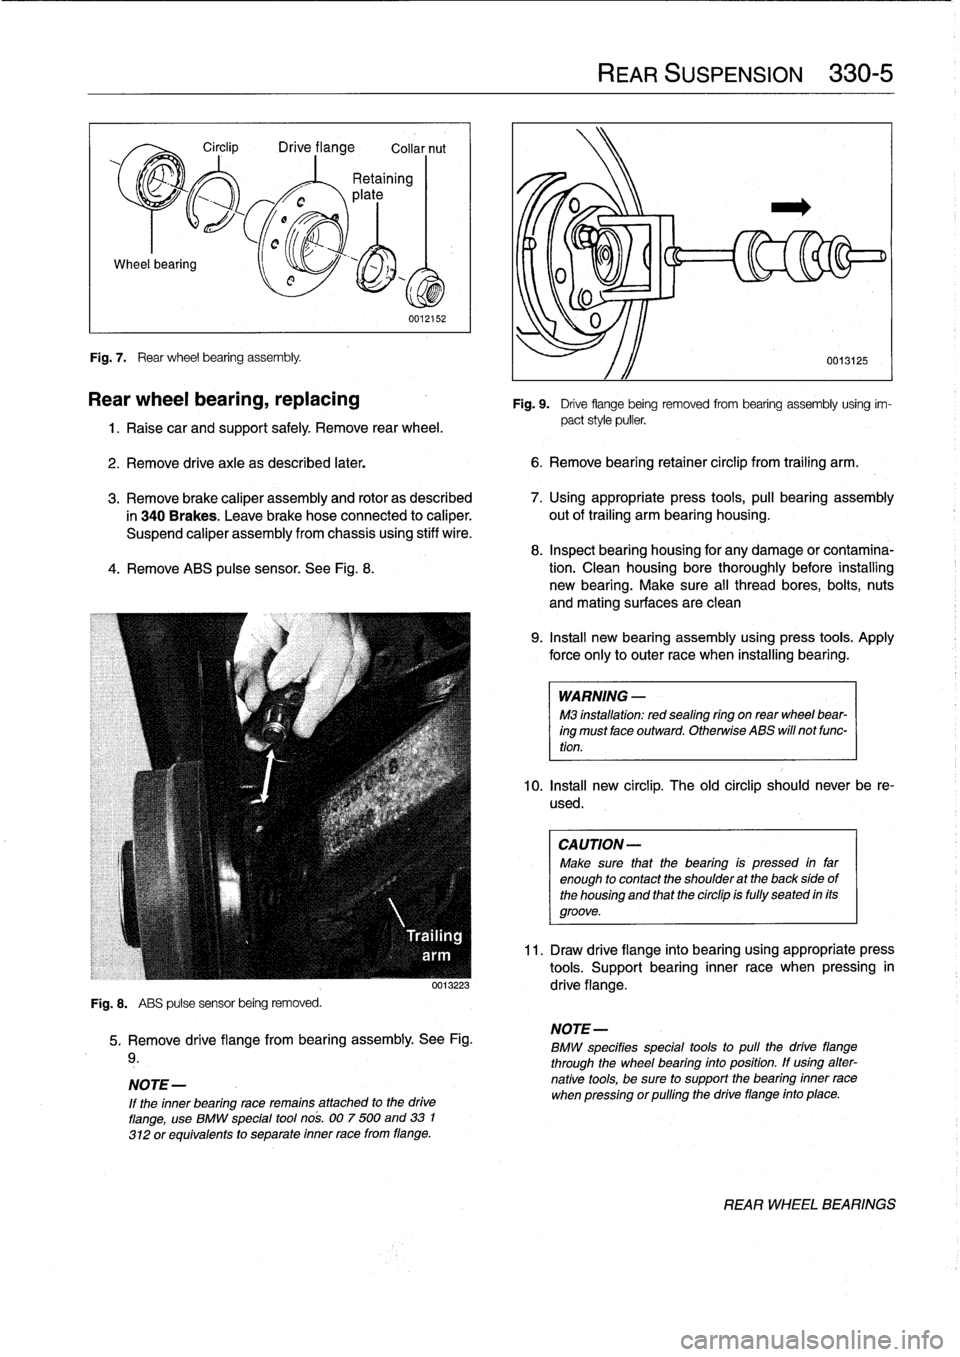 BMW 318i 1998 E36 Owners Guide Wheel
bearing

Fig
.
7
.

	

Rear
wheel
bearing
assembly
.

Circlip

	

Drive
flange

	

Collar
nut

0012152

Rear
wheel
bearing,
replacing

1
.
Raise
car
and
support
safely
.
Remove
rear
wheel
.

2
.